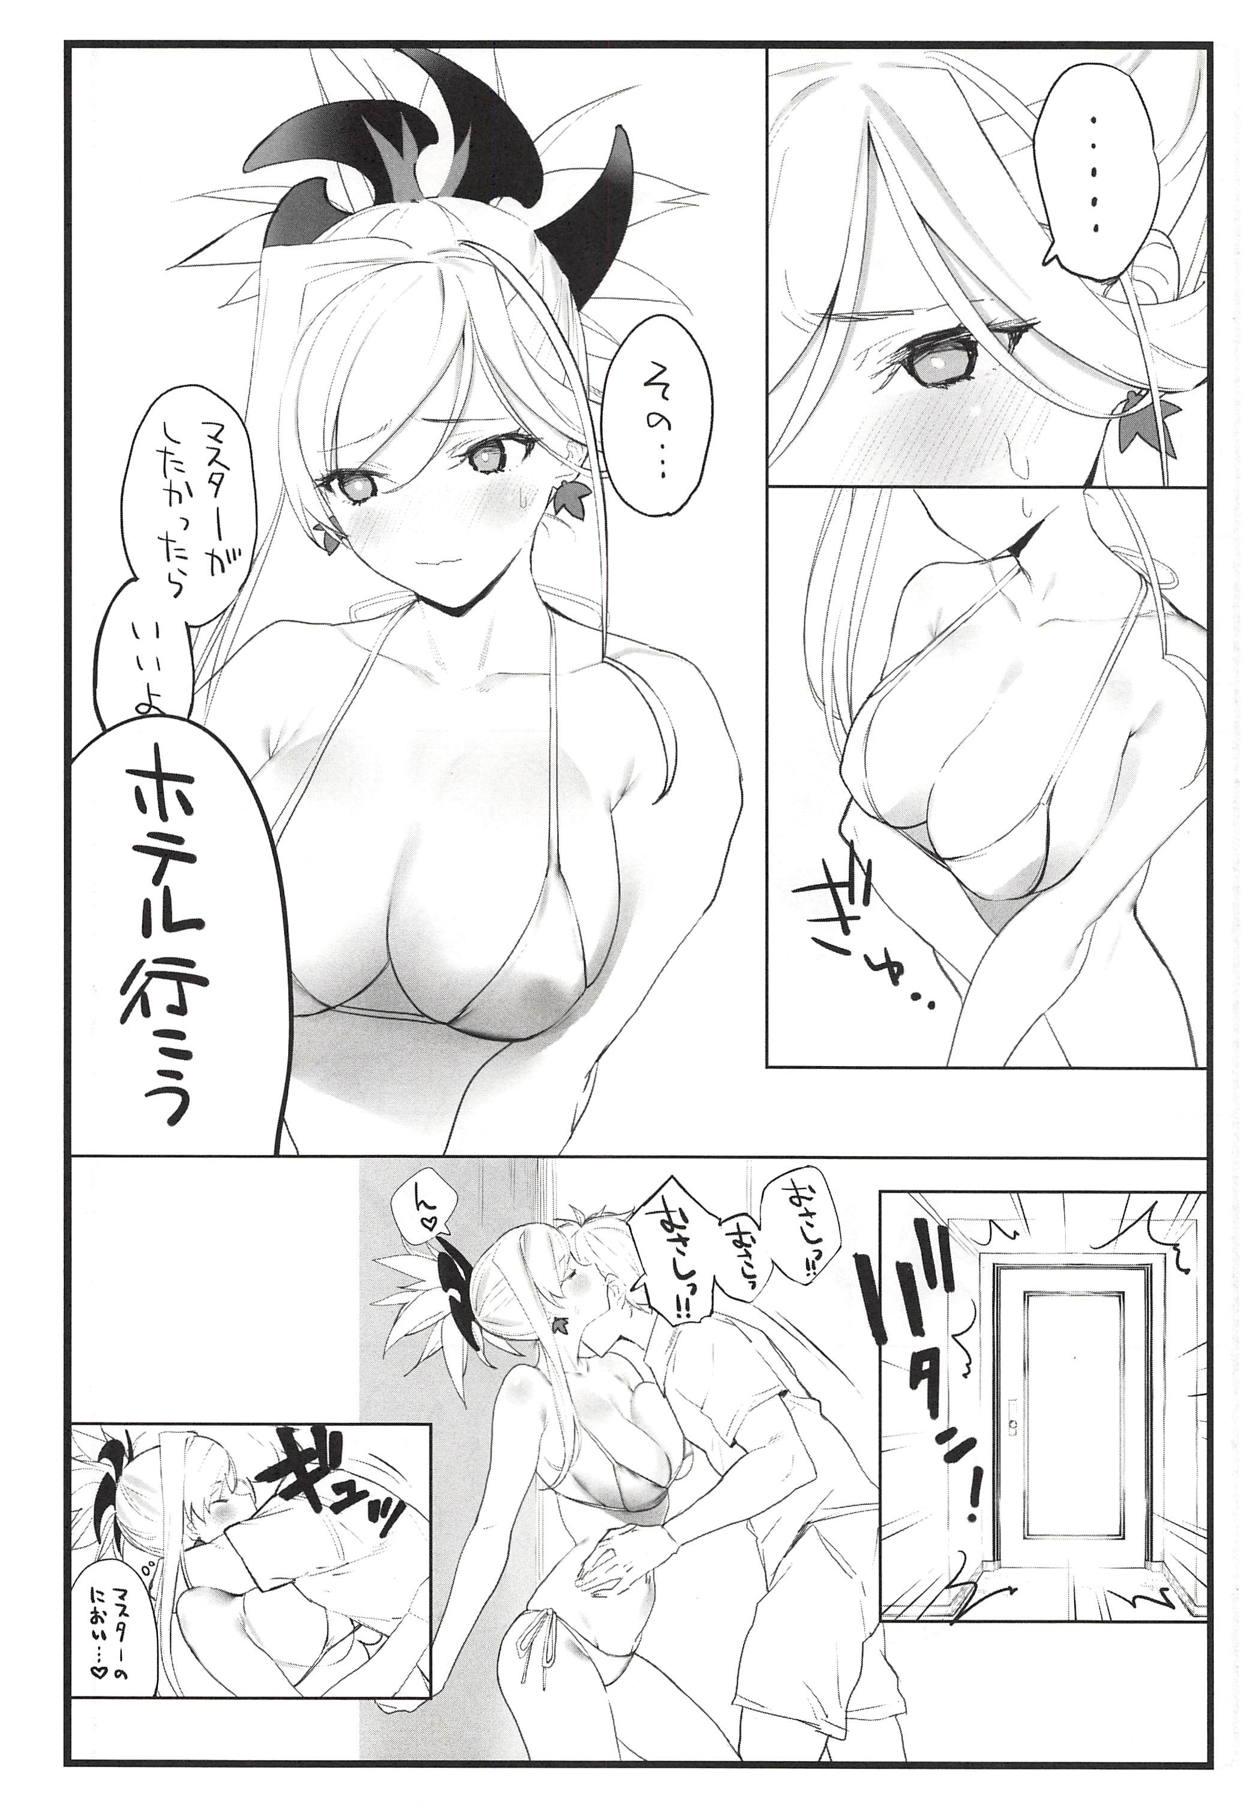 Gapes Gaping Asshole Musashi-chan no Hon - Fate grand order Girls Getting Fucked - Page 7